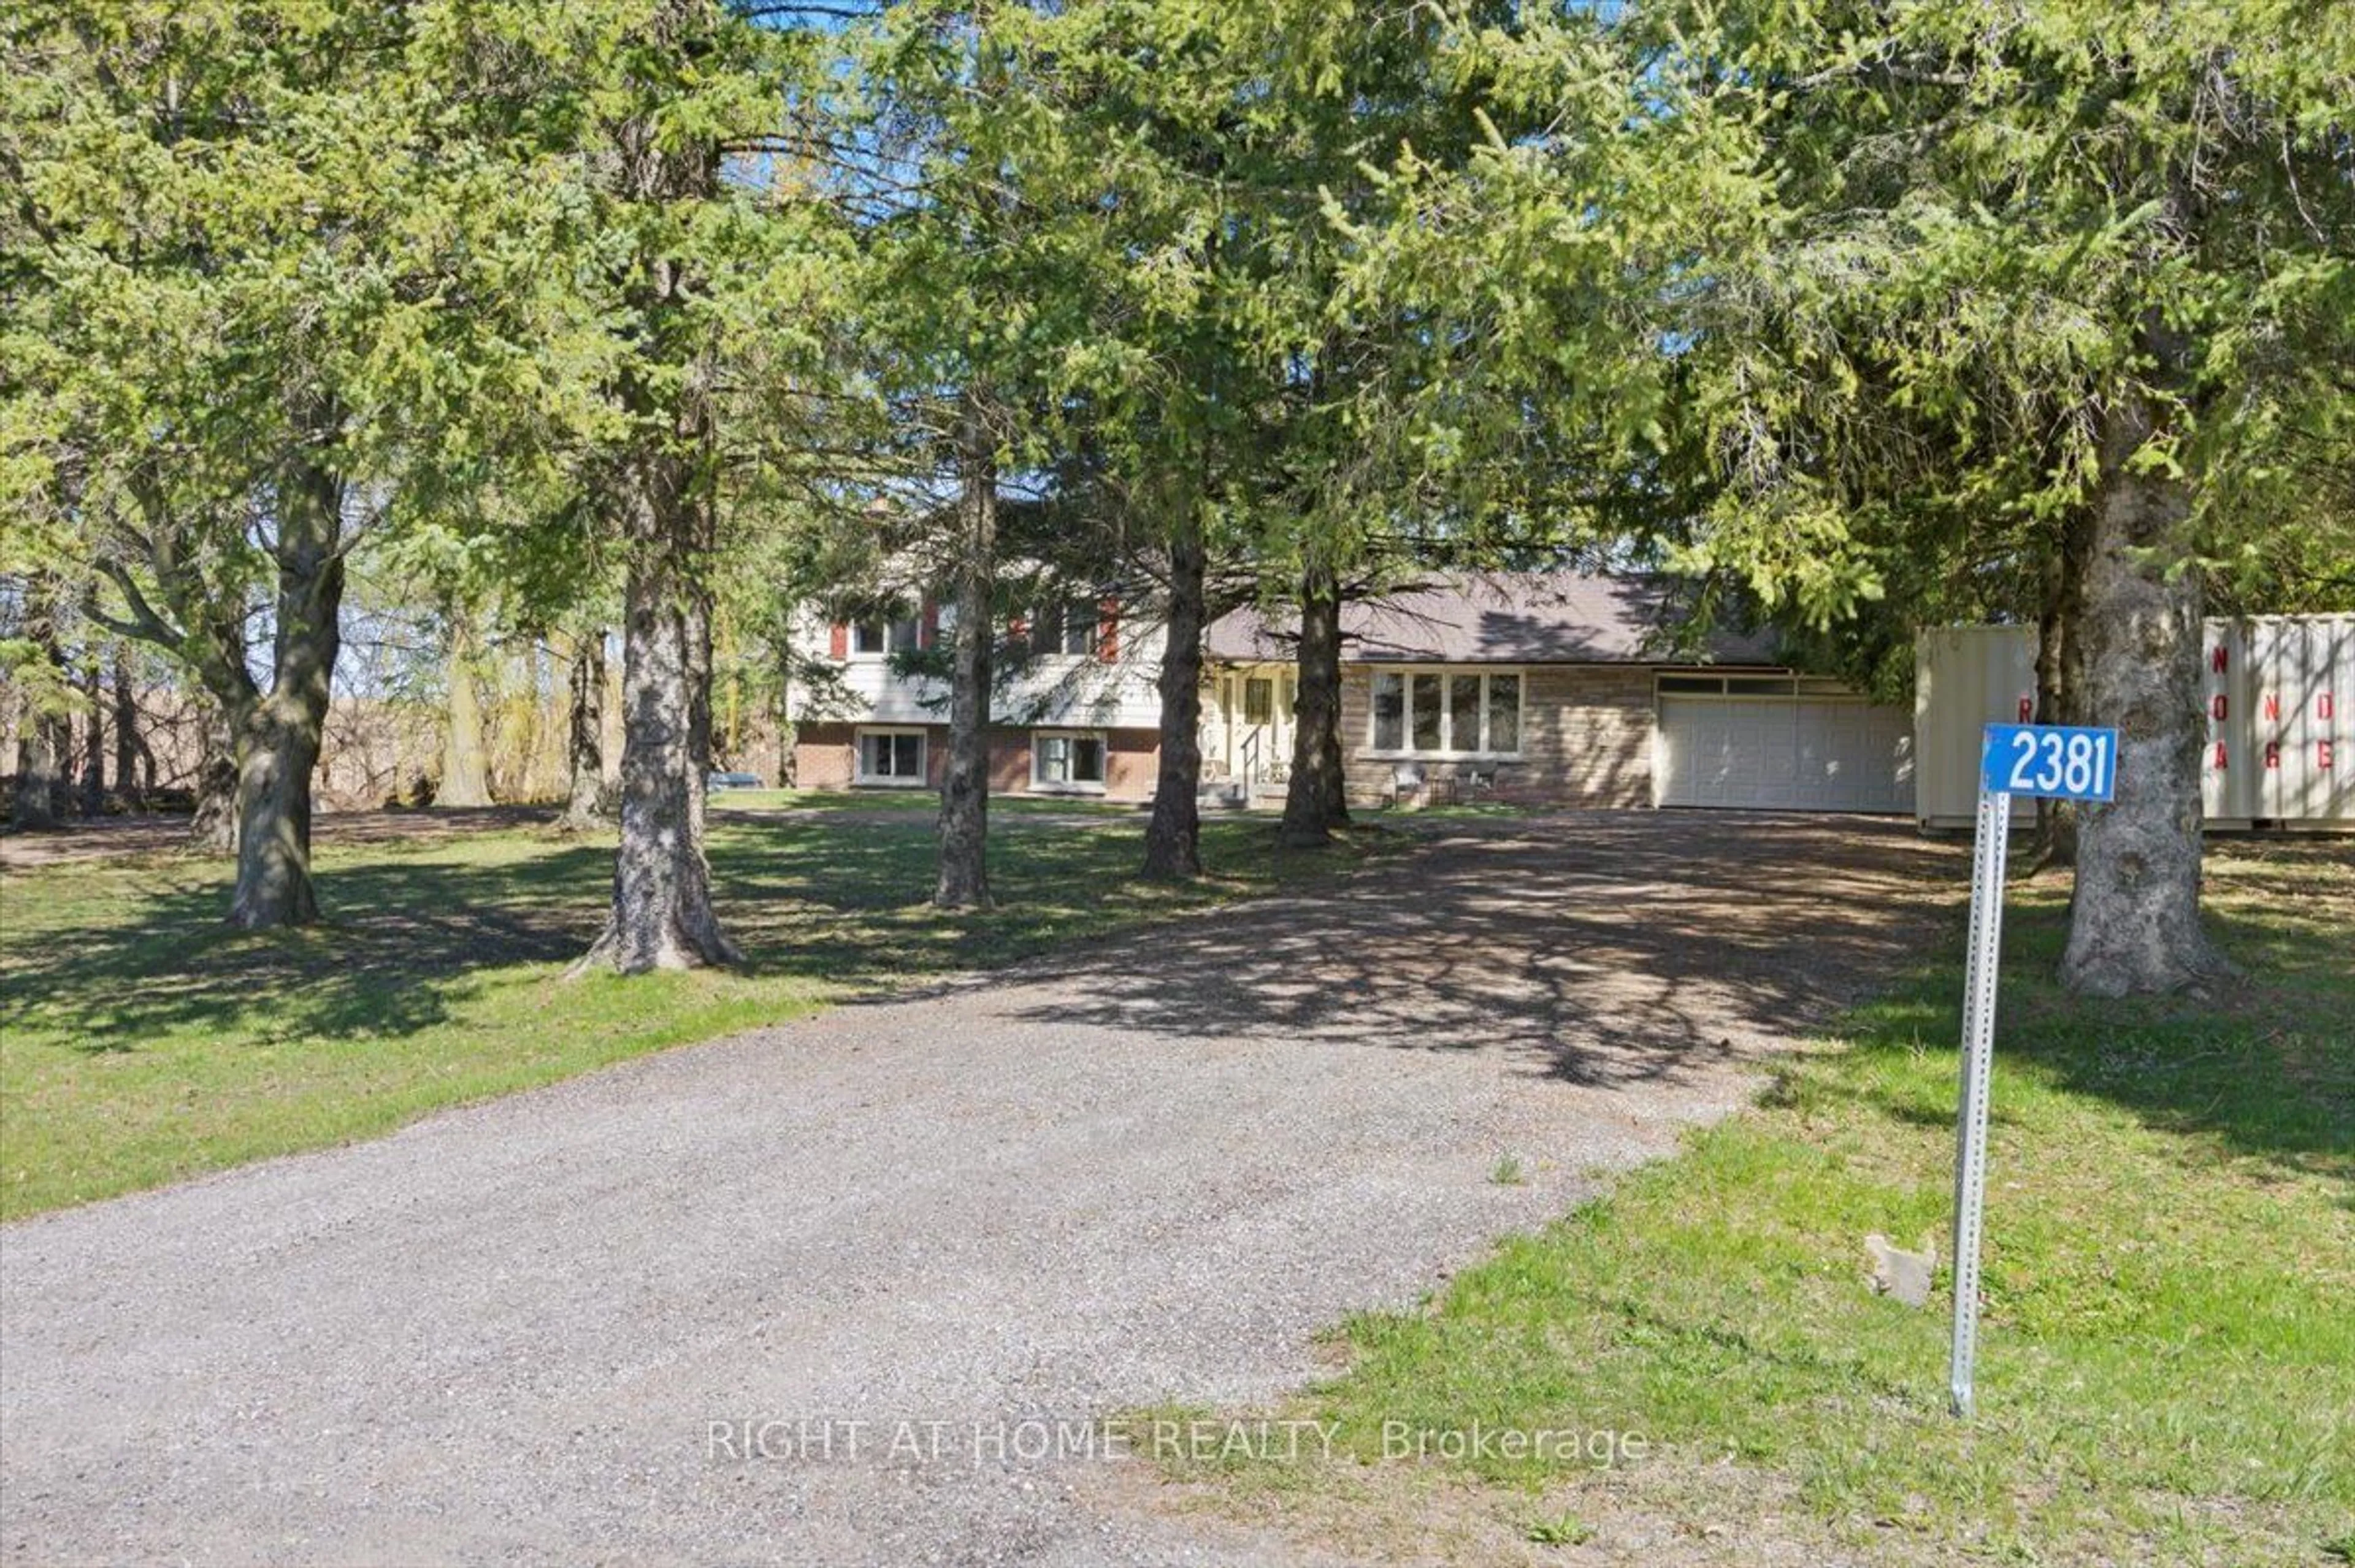 Street view for 2381 Head Rd, Scugog Ontario L9L 1B4